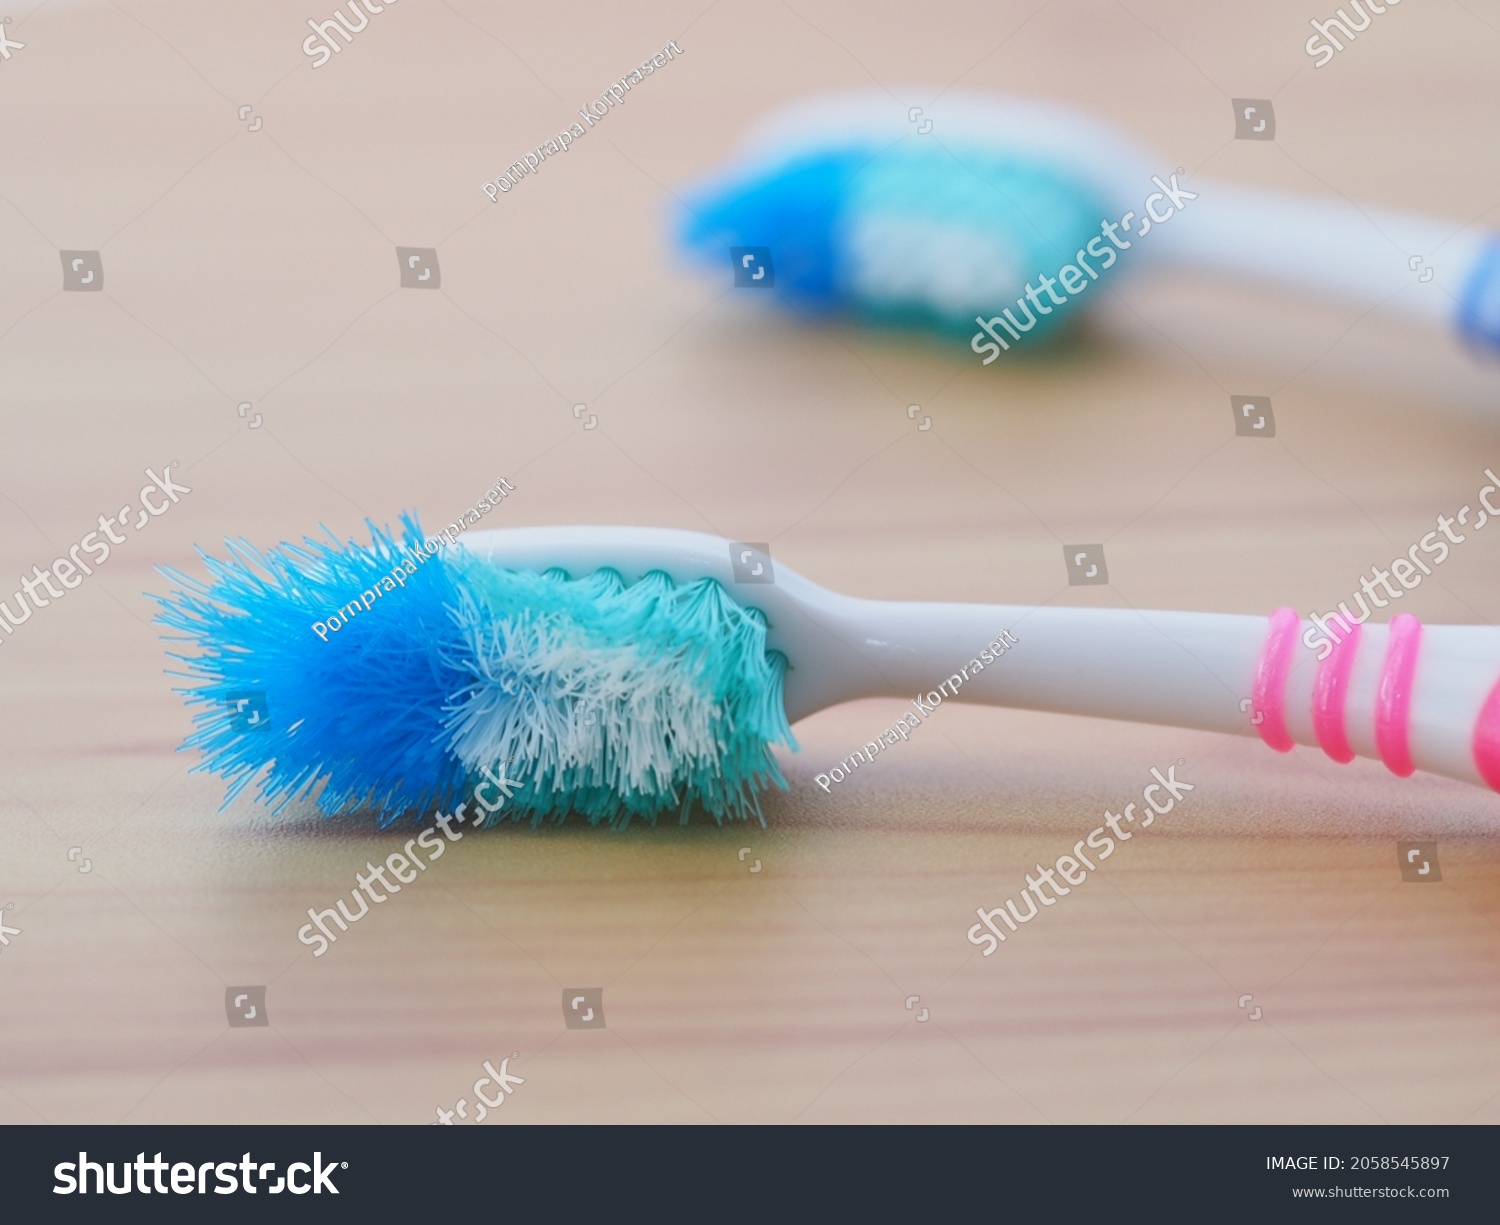 Comparison of the old and new toothbrushes showing different bristle conditions: time to change a new toothbrush #2058545897